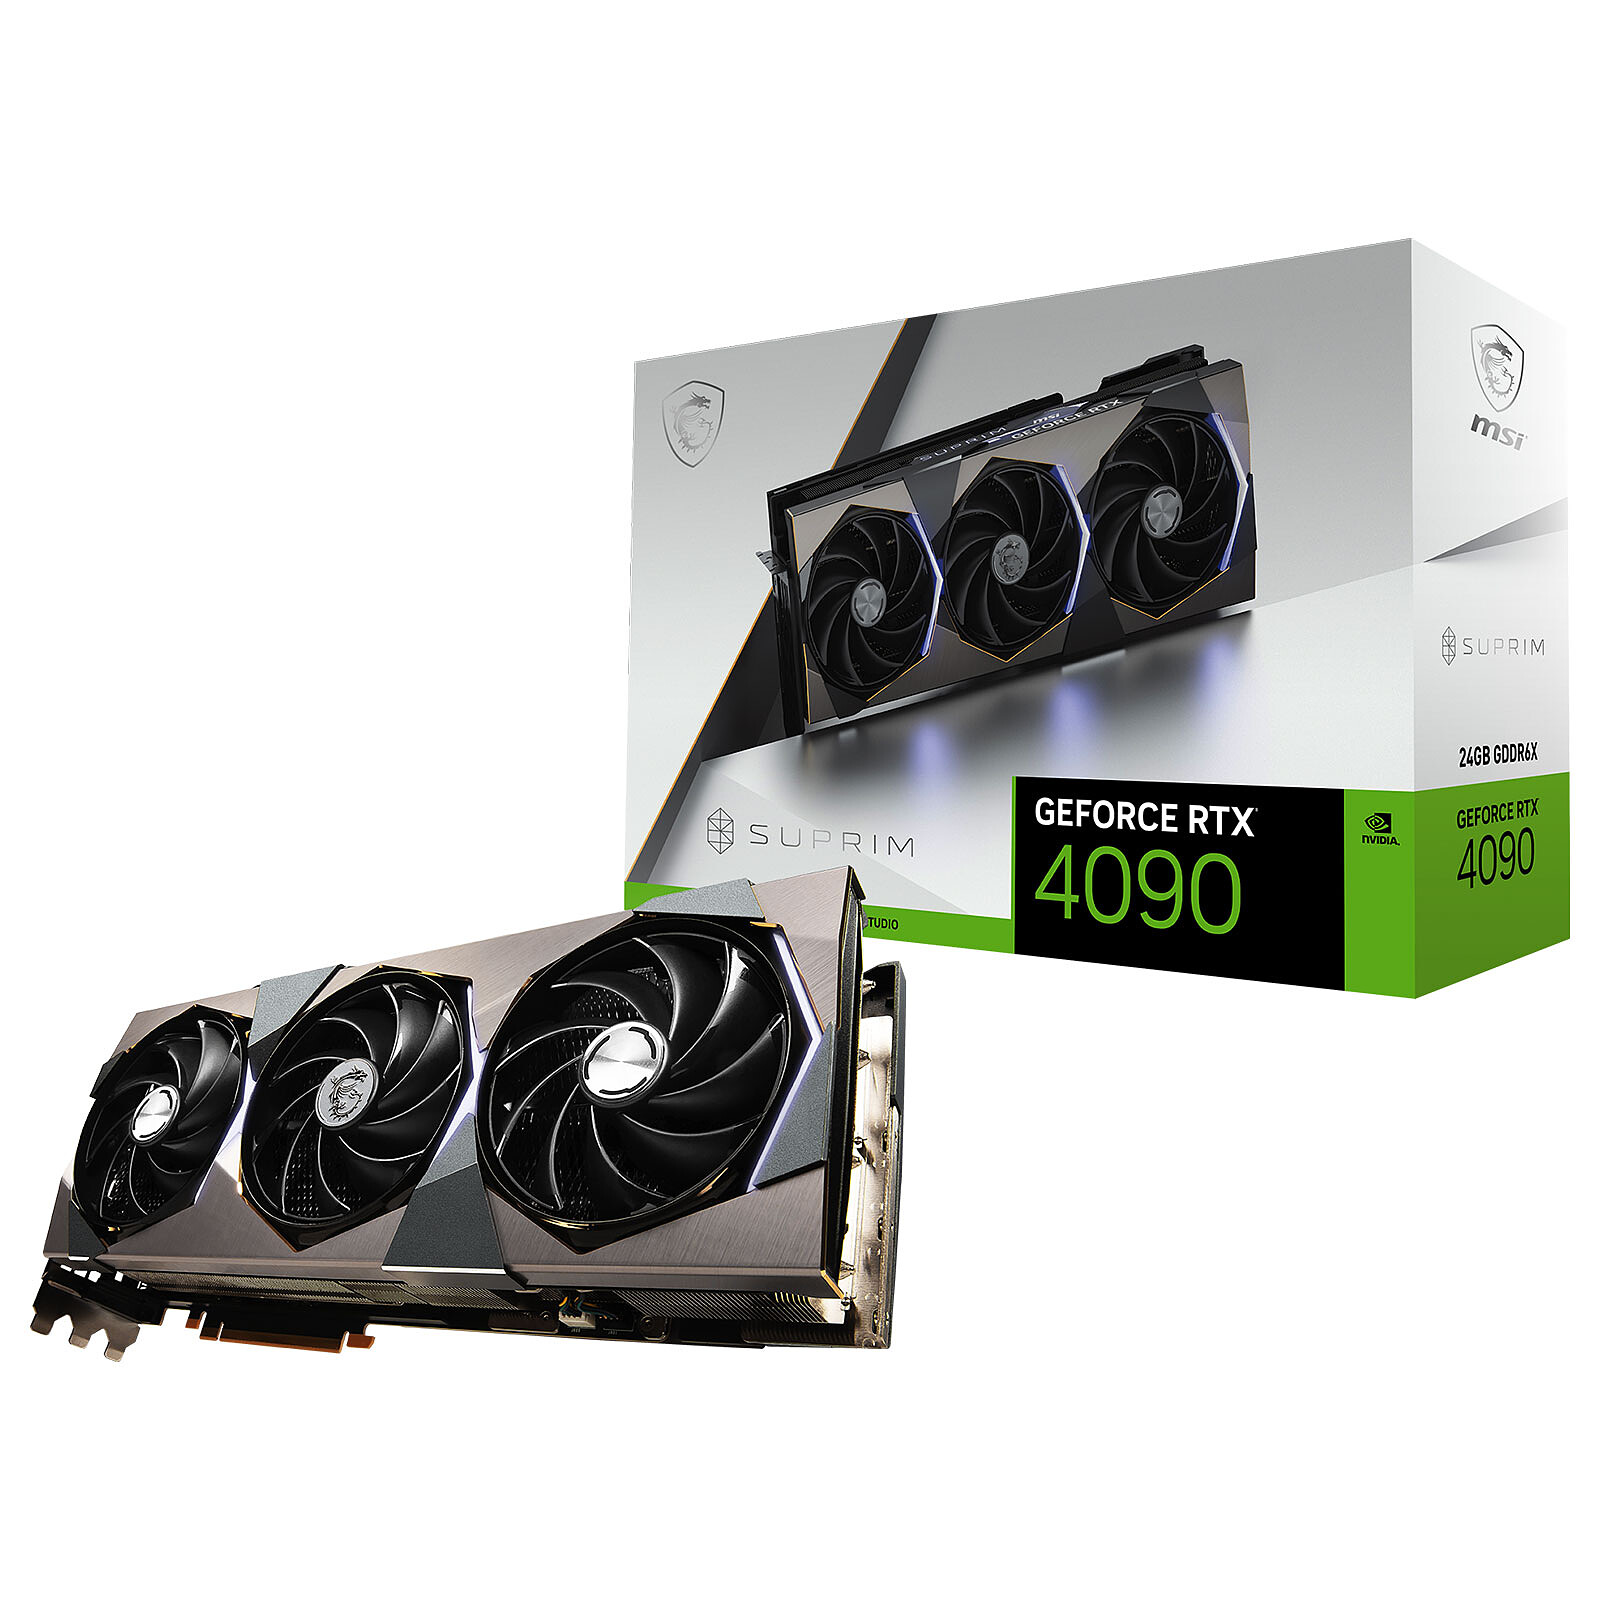 RTX 4090 Review by someone who actually plays games 